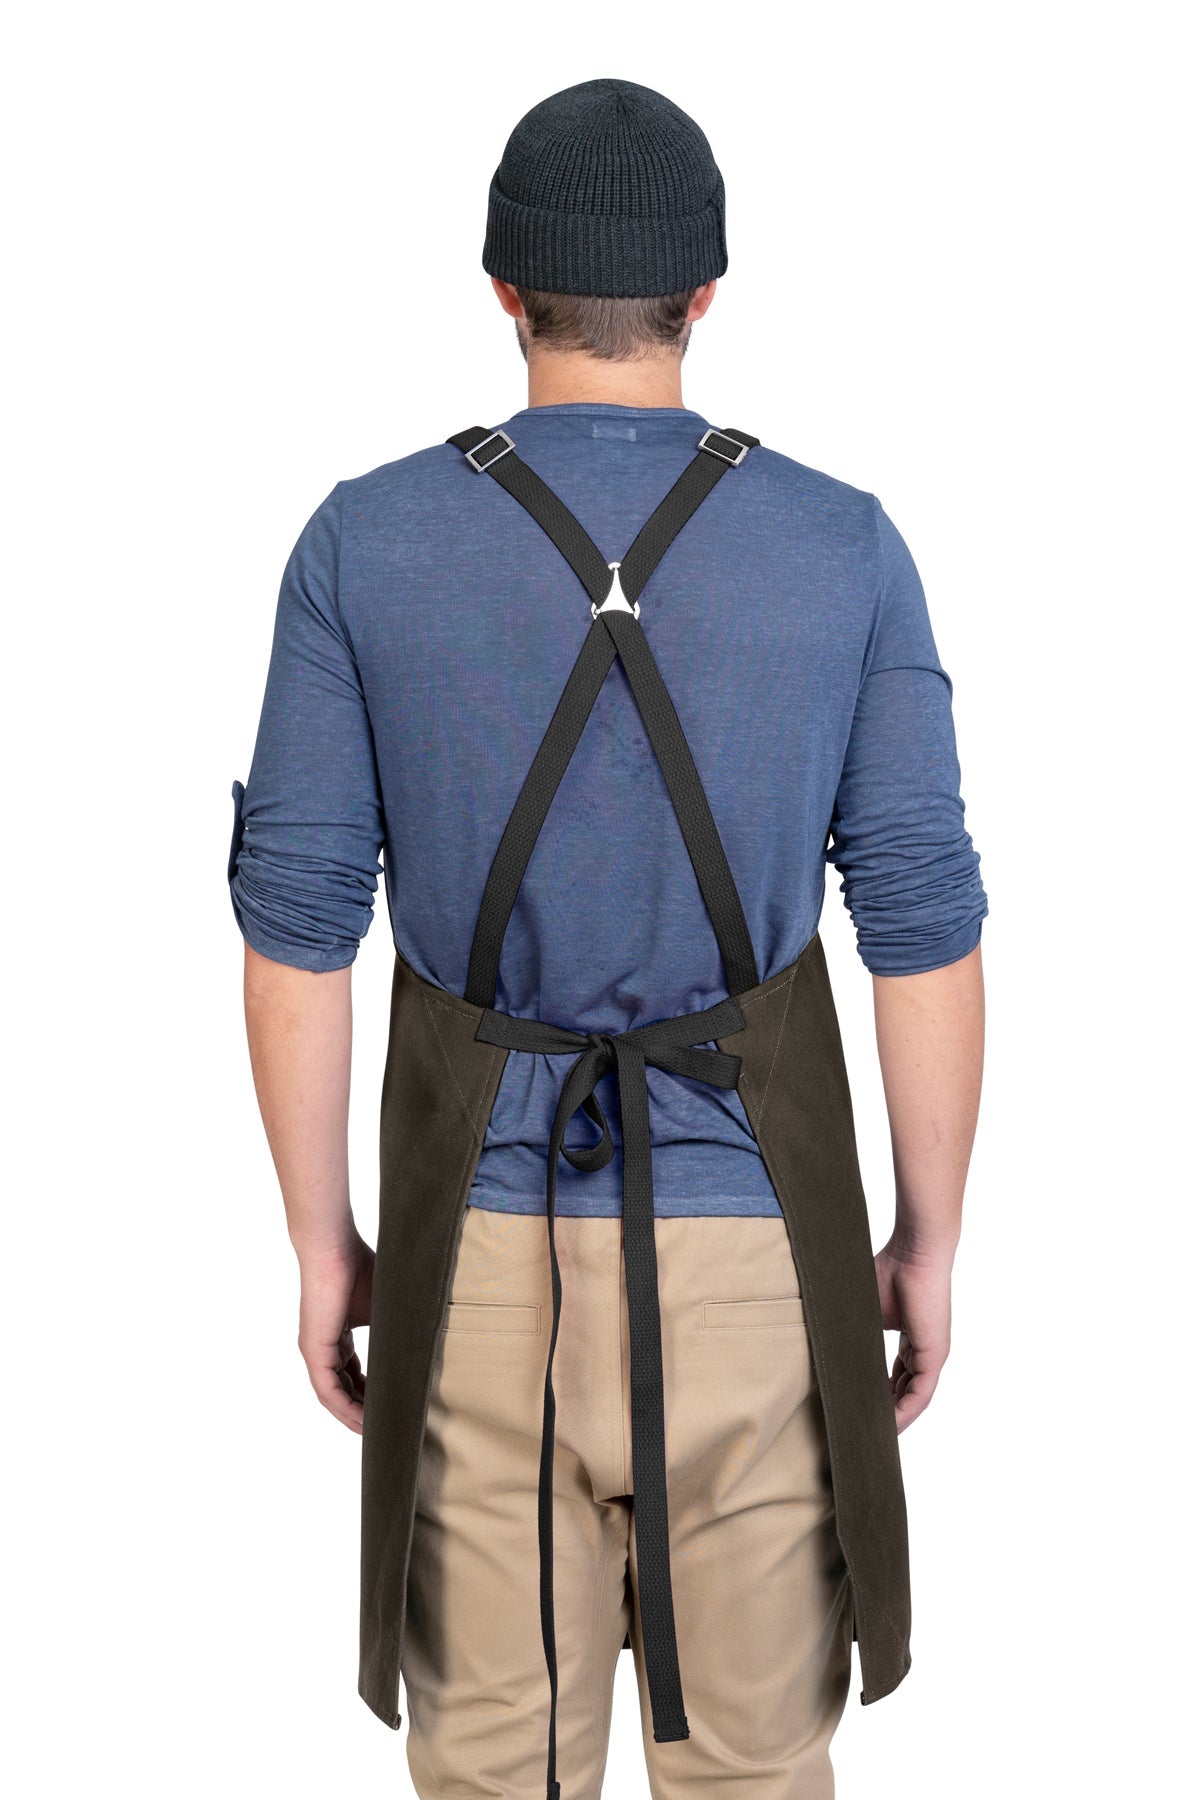 Back view image of person wearing Lucca Crossback Apron in Dark Brown Canvas. | BlueCut Aprons				